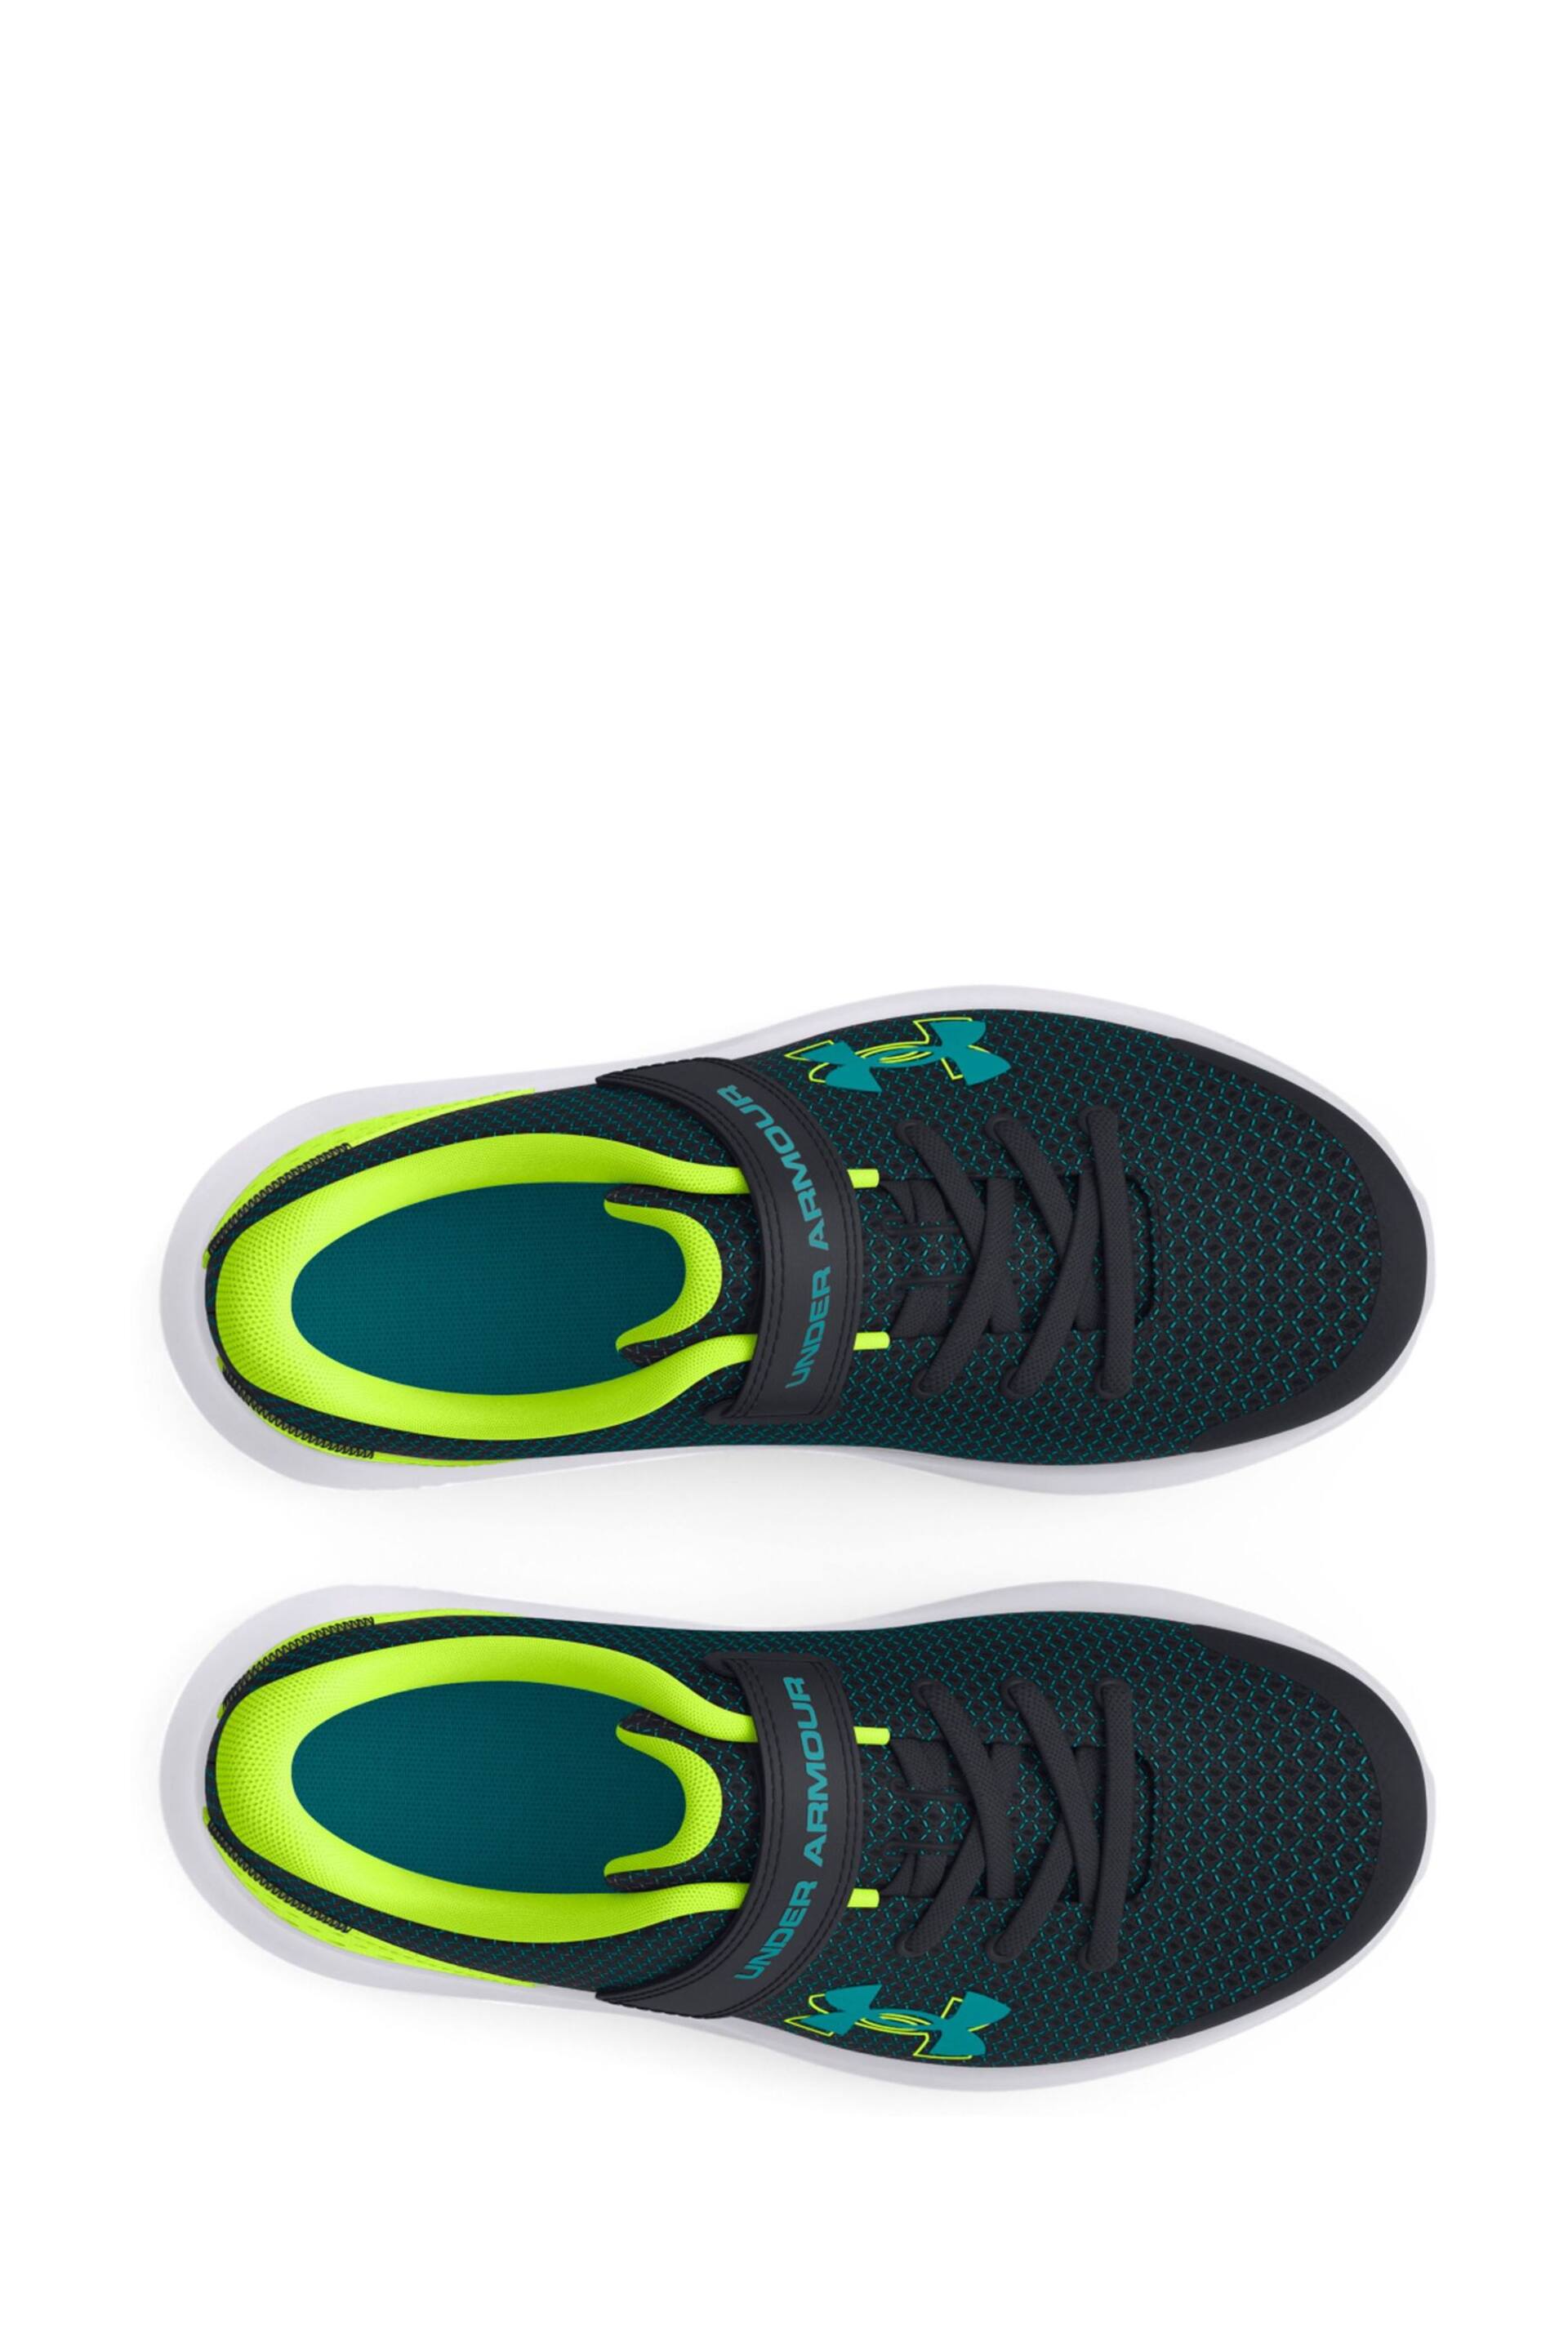 Under Armour BPS Surge Trainers - Image 4 of 5